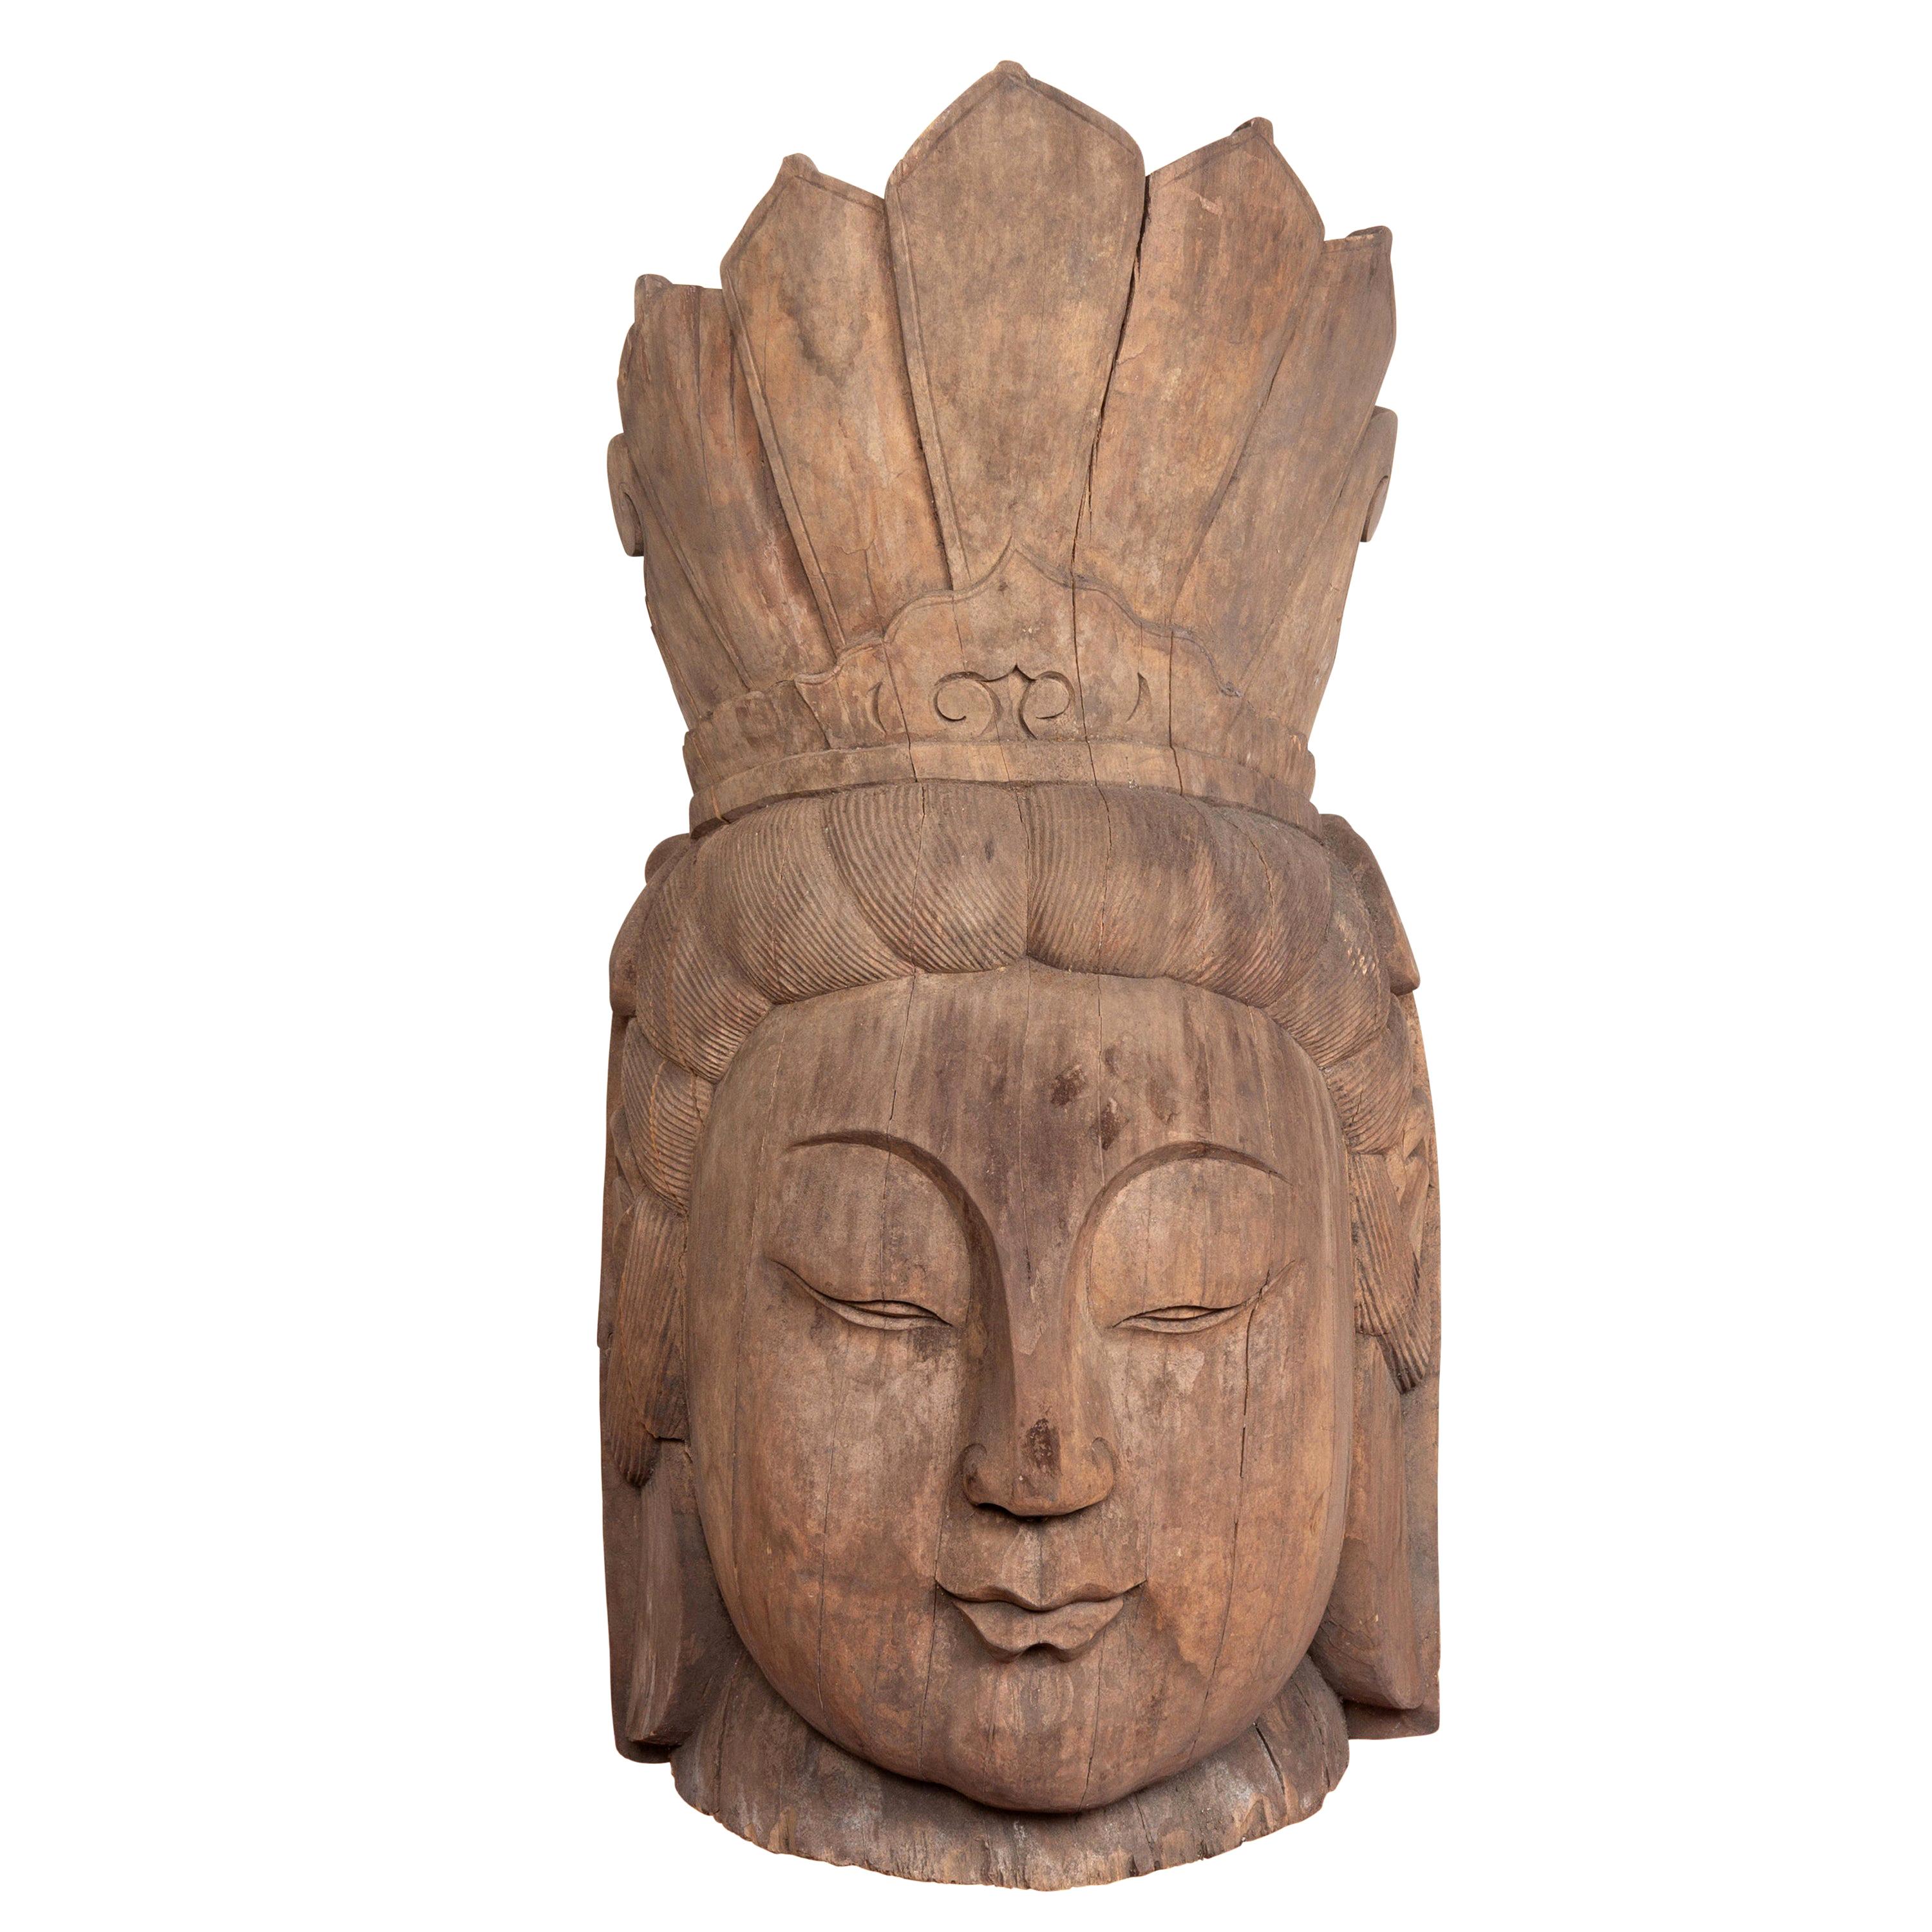 Vintage Thai Carved Wooden Head Sculpture of Guanyin, Bodhisattva of Compassion